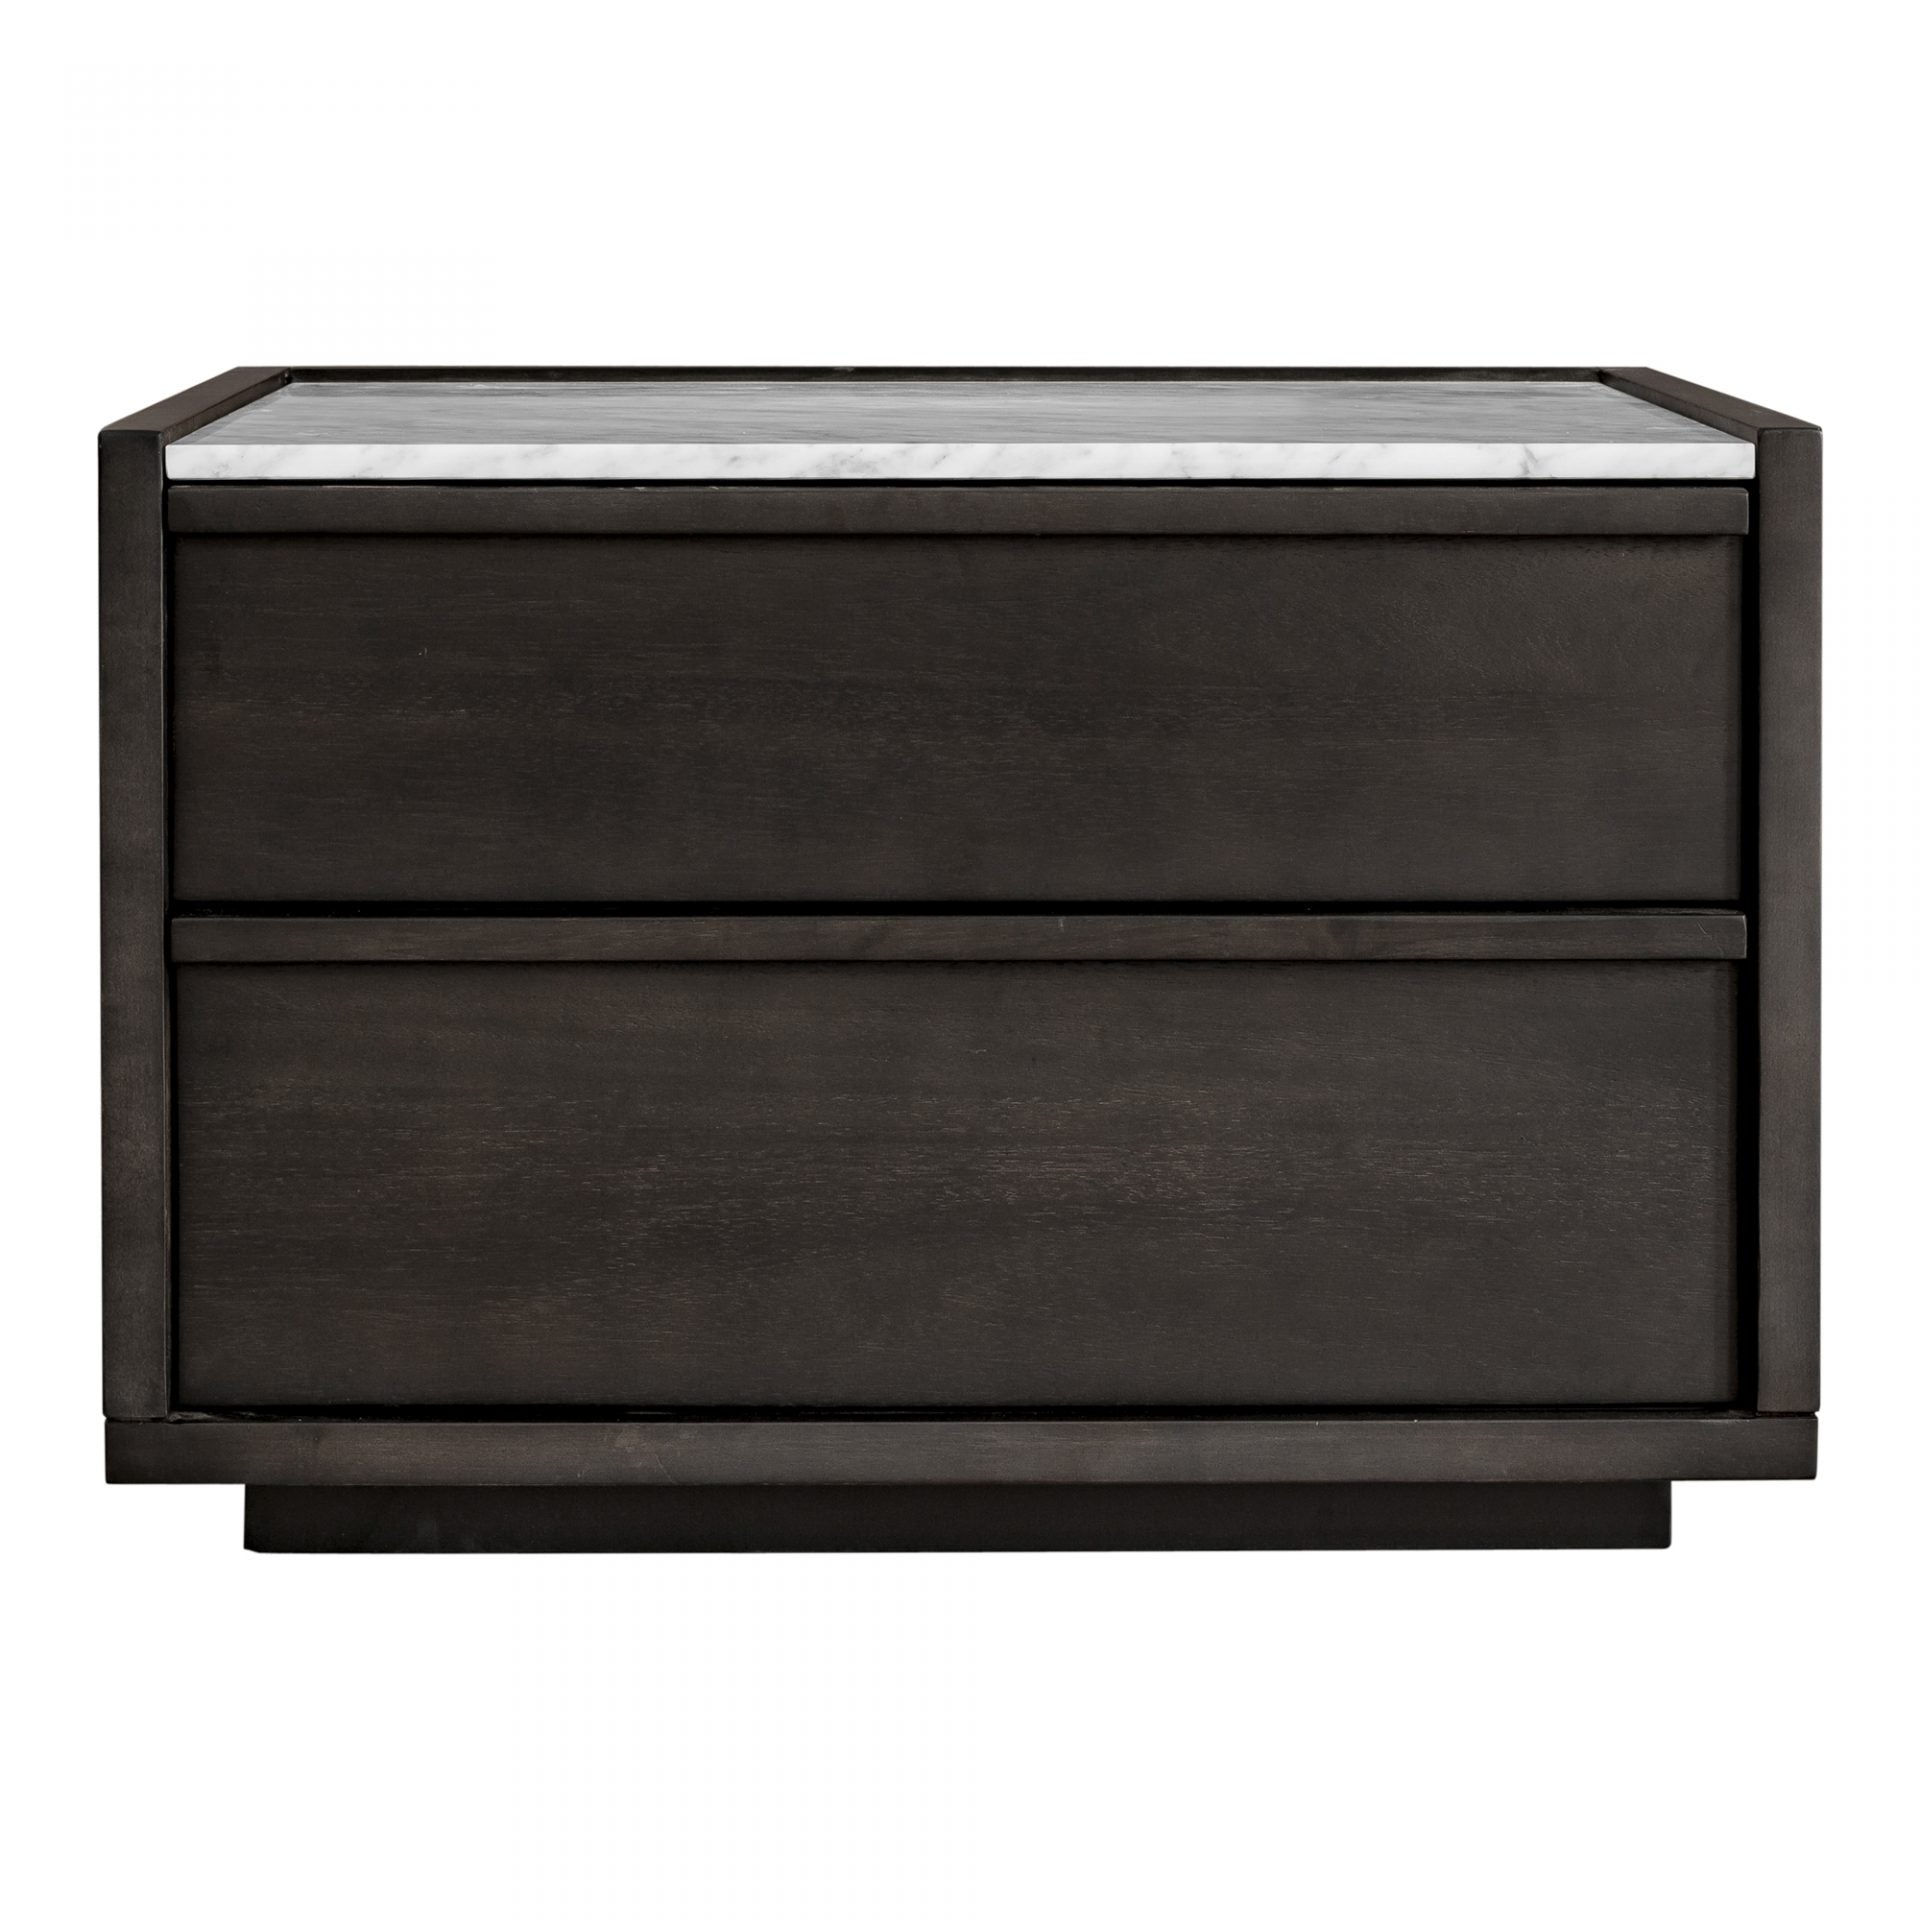 We love the white marble top of this Ashcroft Nightstand. With two soft-close drawers, this is a sophisticated and functional piece to add to your bedroom.   Size: 26.5"W x 19"D x 18"H Material: Acacia Veneer, White Marble Top, MDF